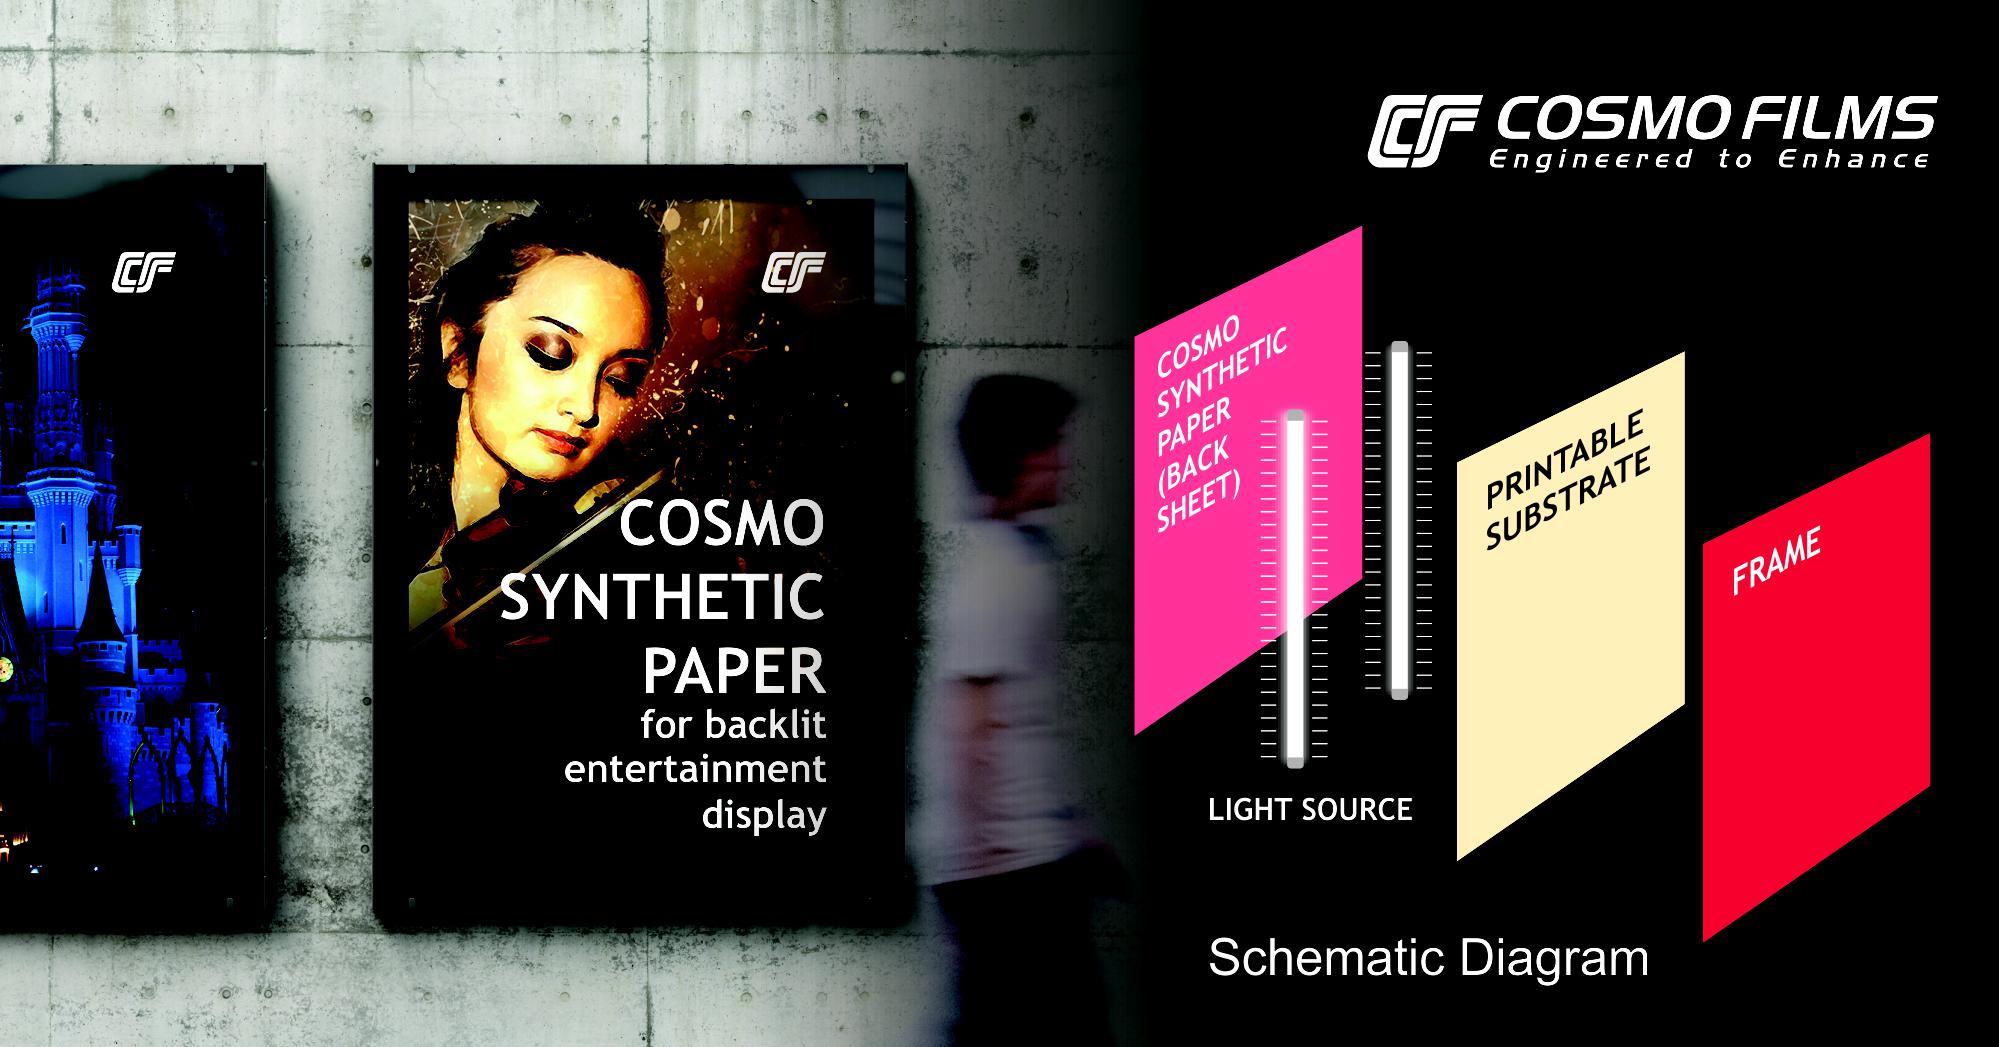 Cosmo Synthetic Paper For Backlit Entertainment Display